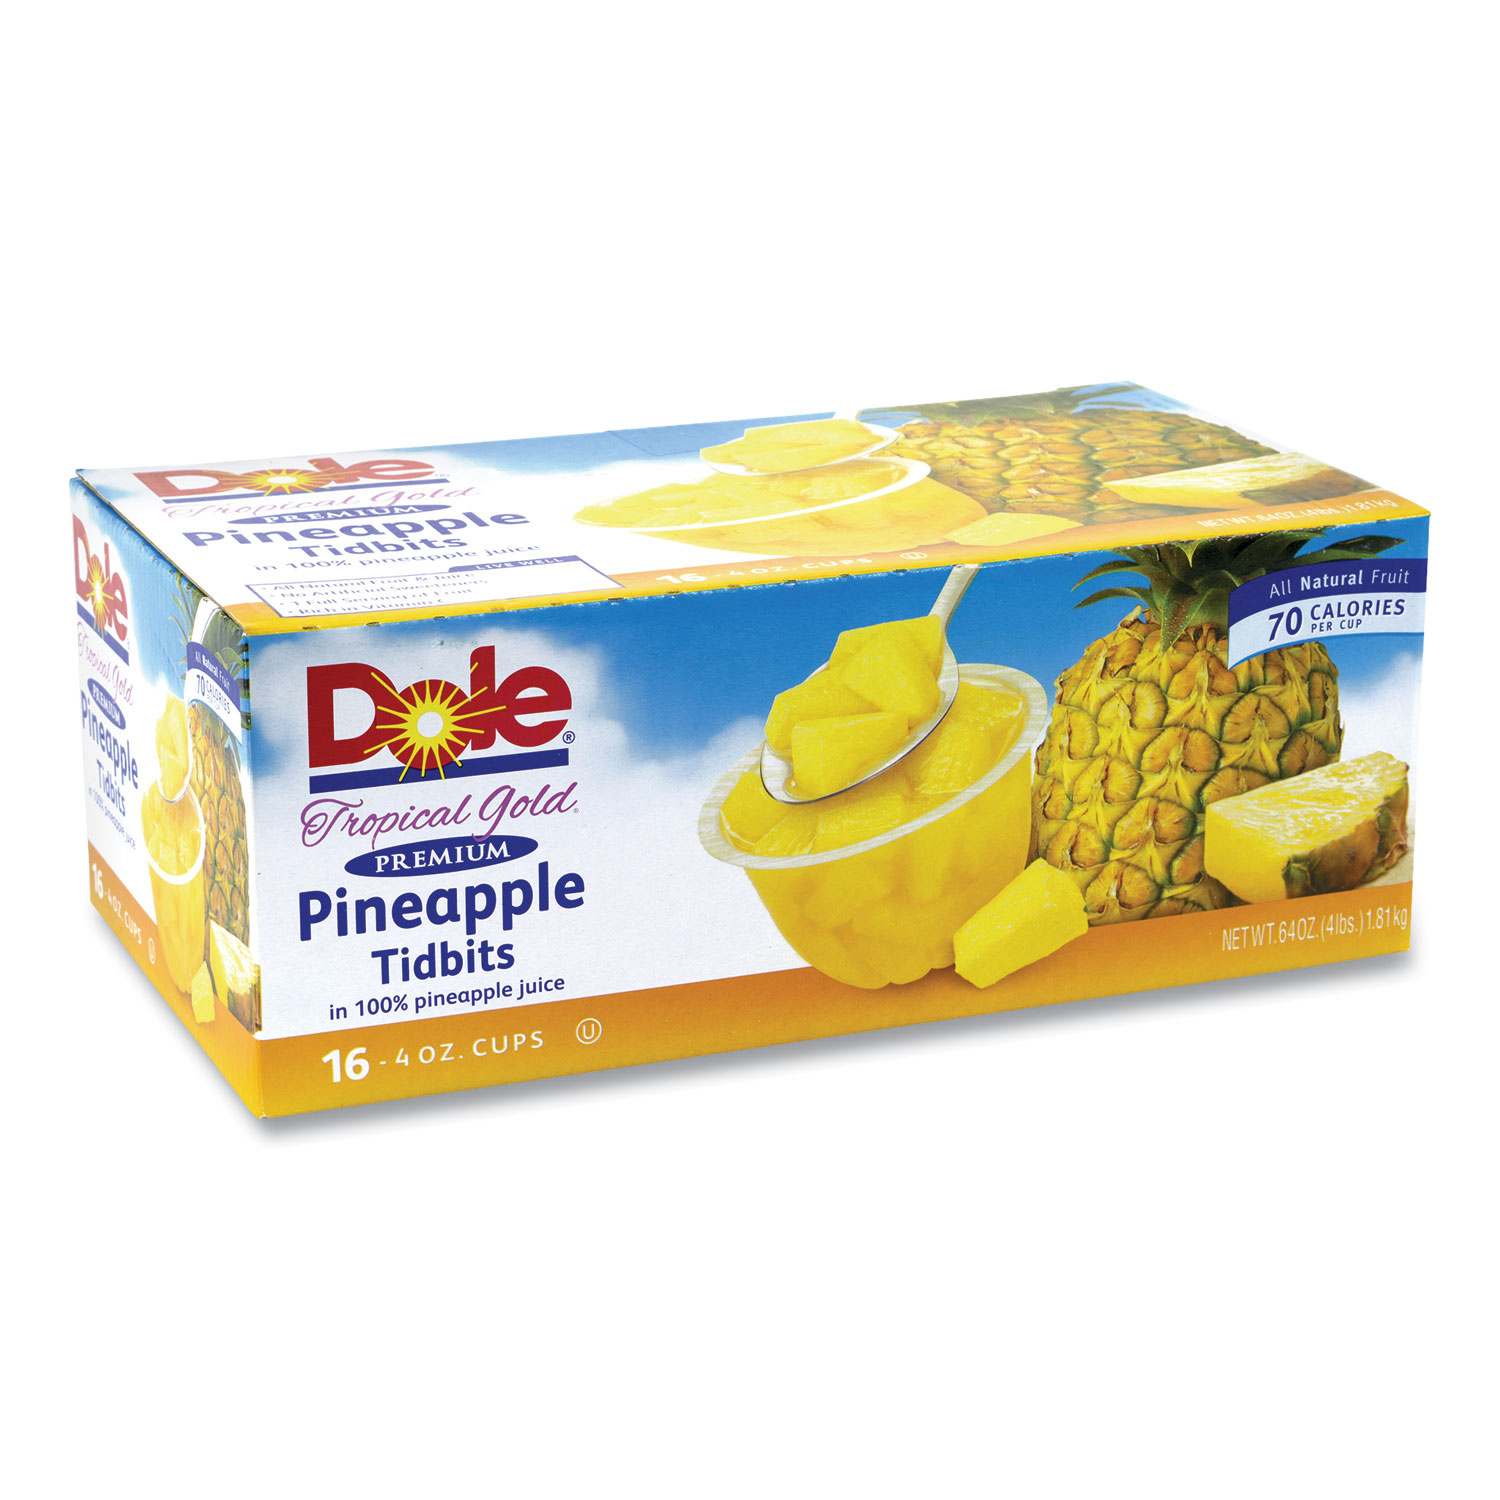  Dole 25903 Tropical Gold Premium Pineapple Tidbits, 4 oz Bowls, 16 Bowls/Carton, Free Delivery in 1-4 Business Days (GRR22000474) 